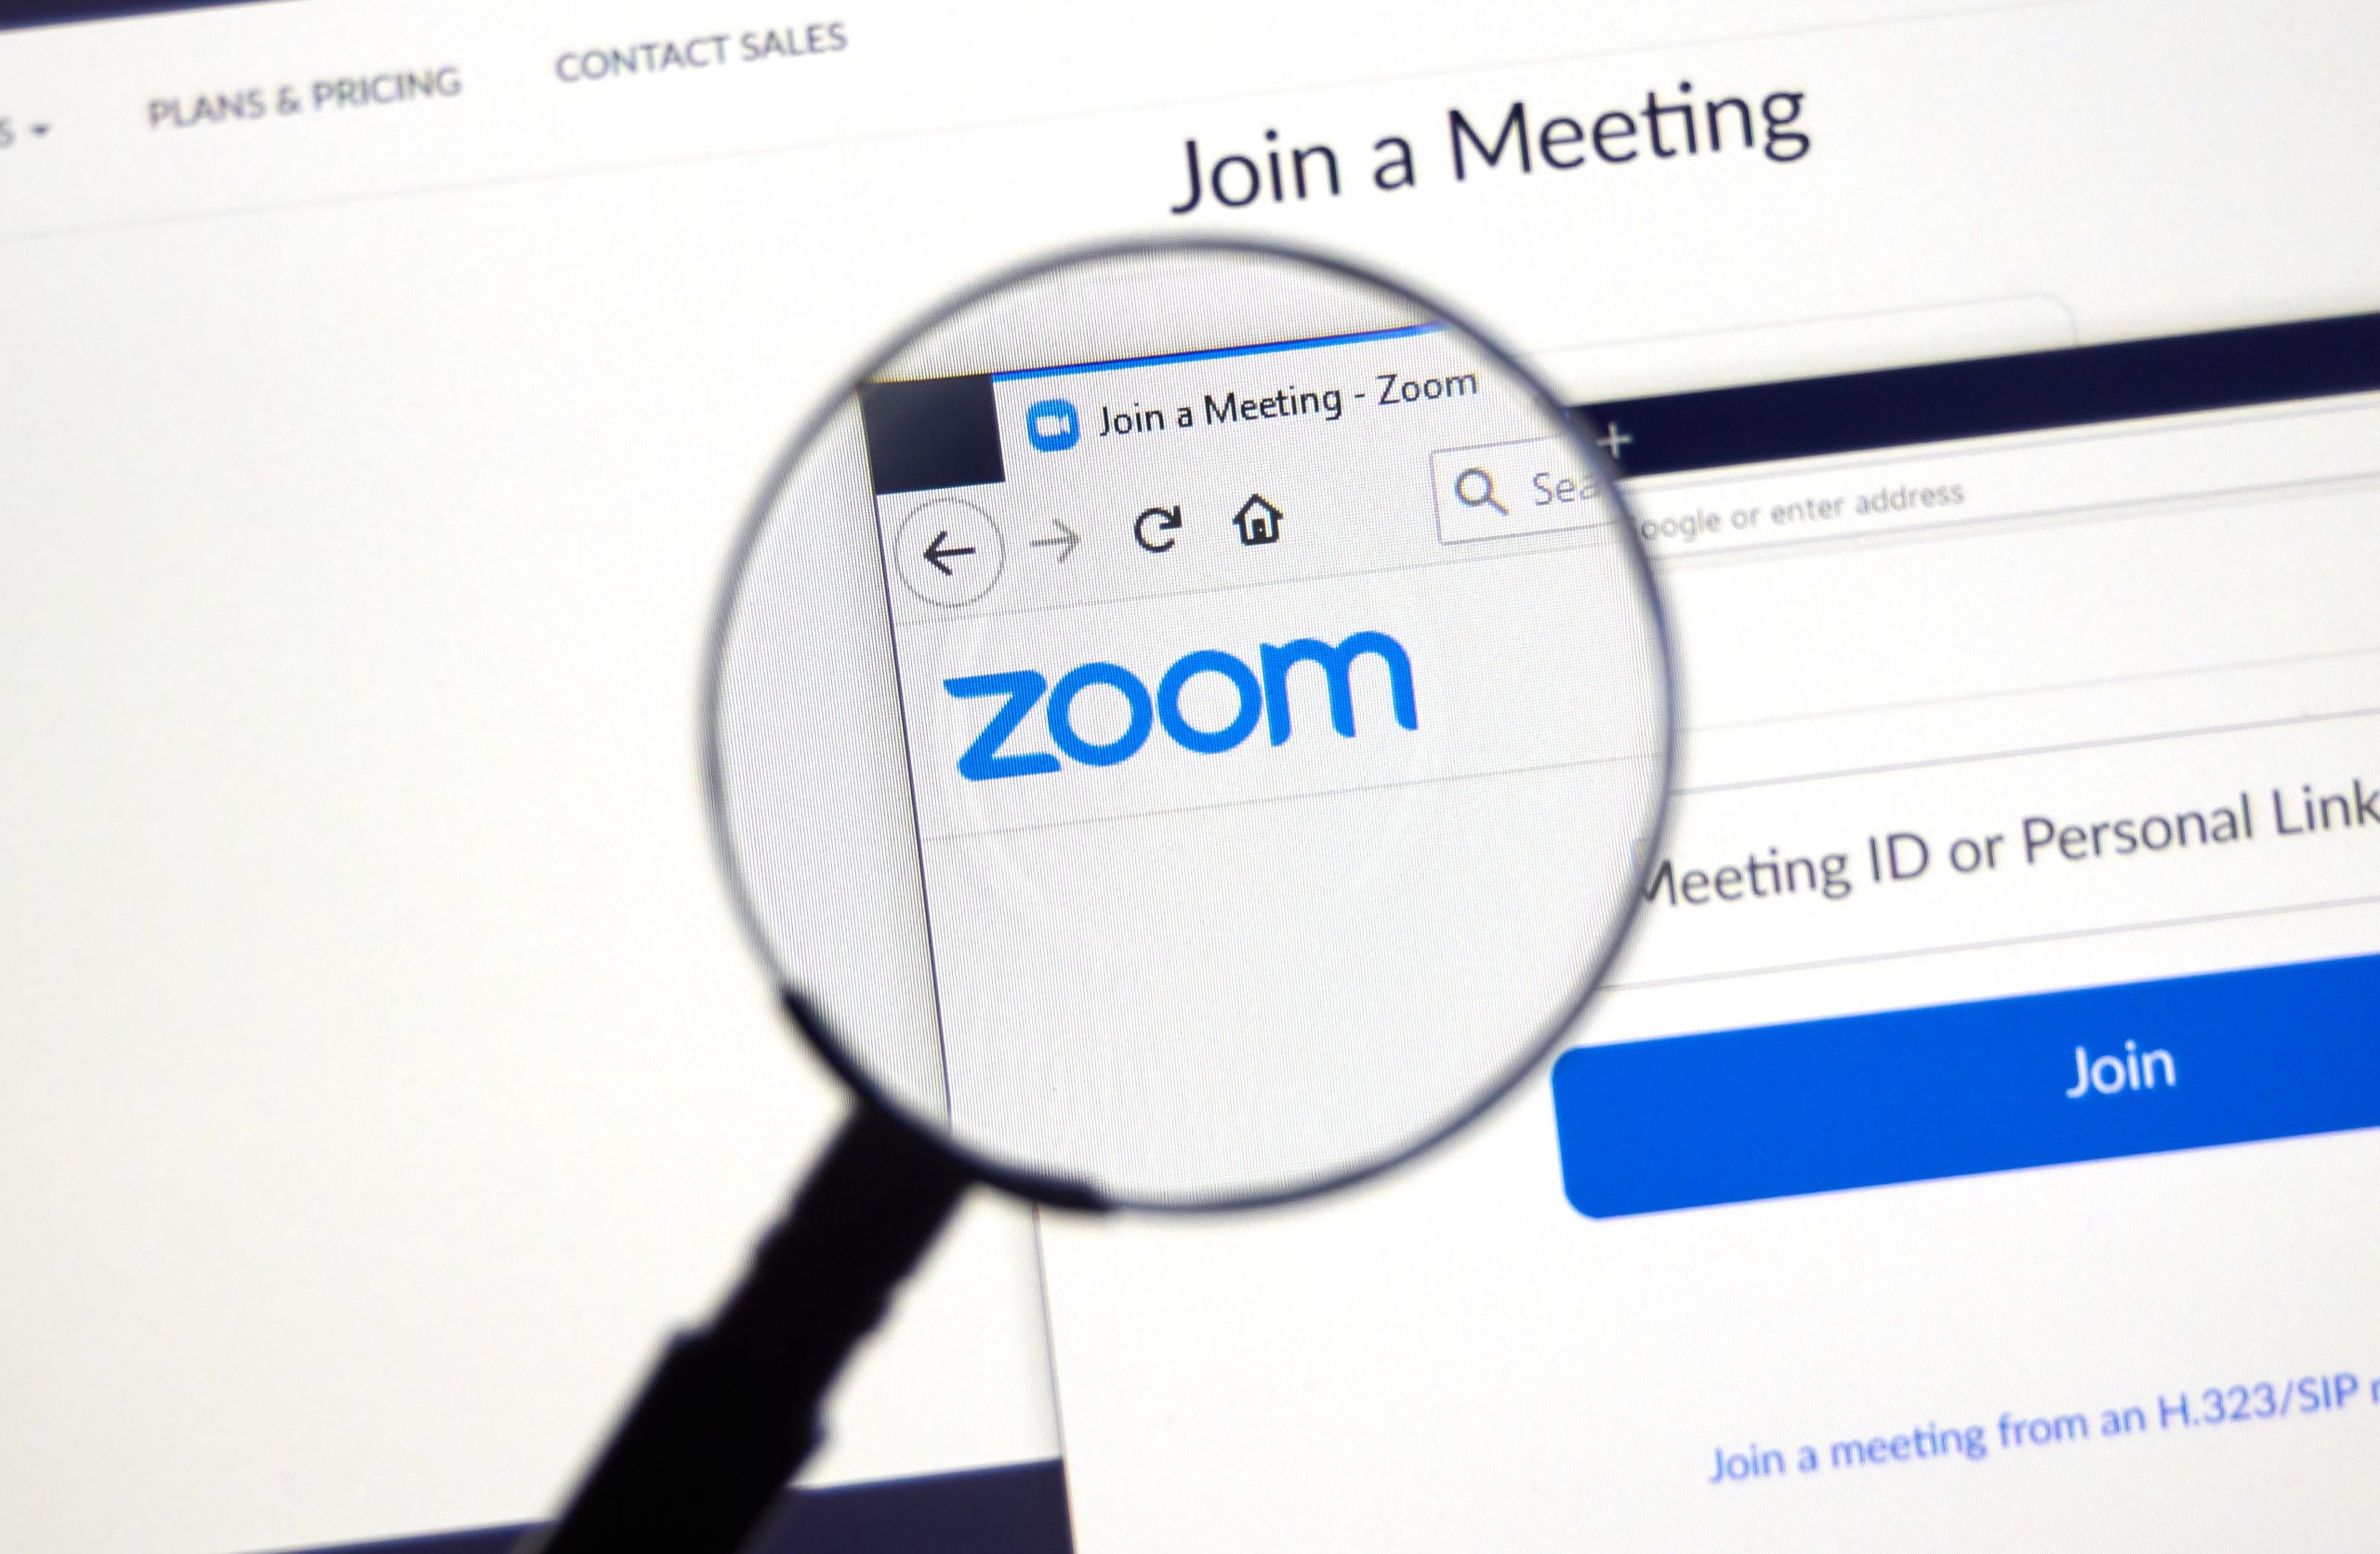 Zoom meeting experiencing security issues